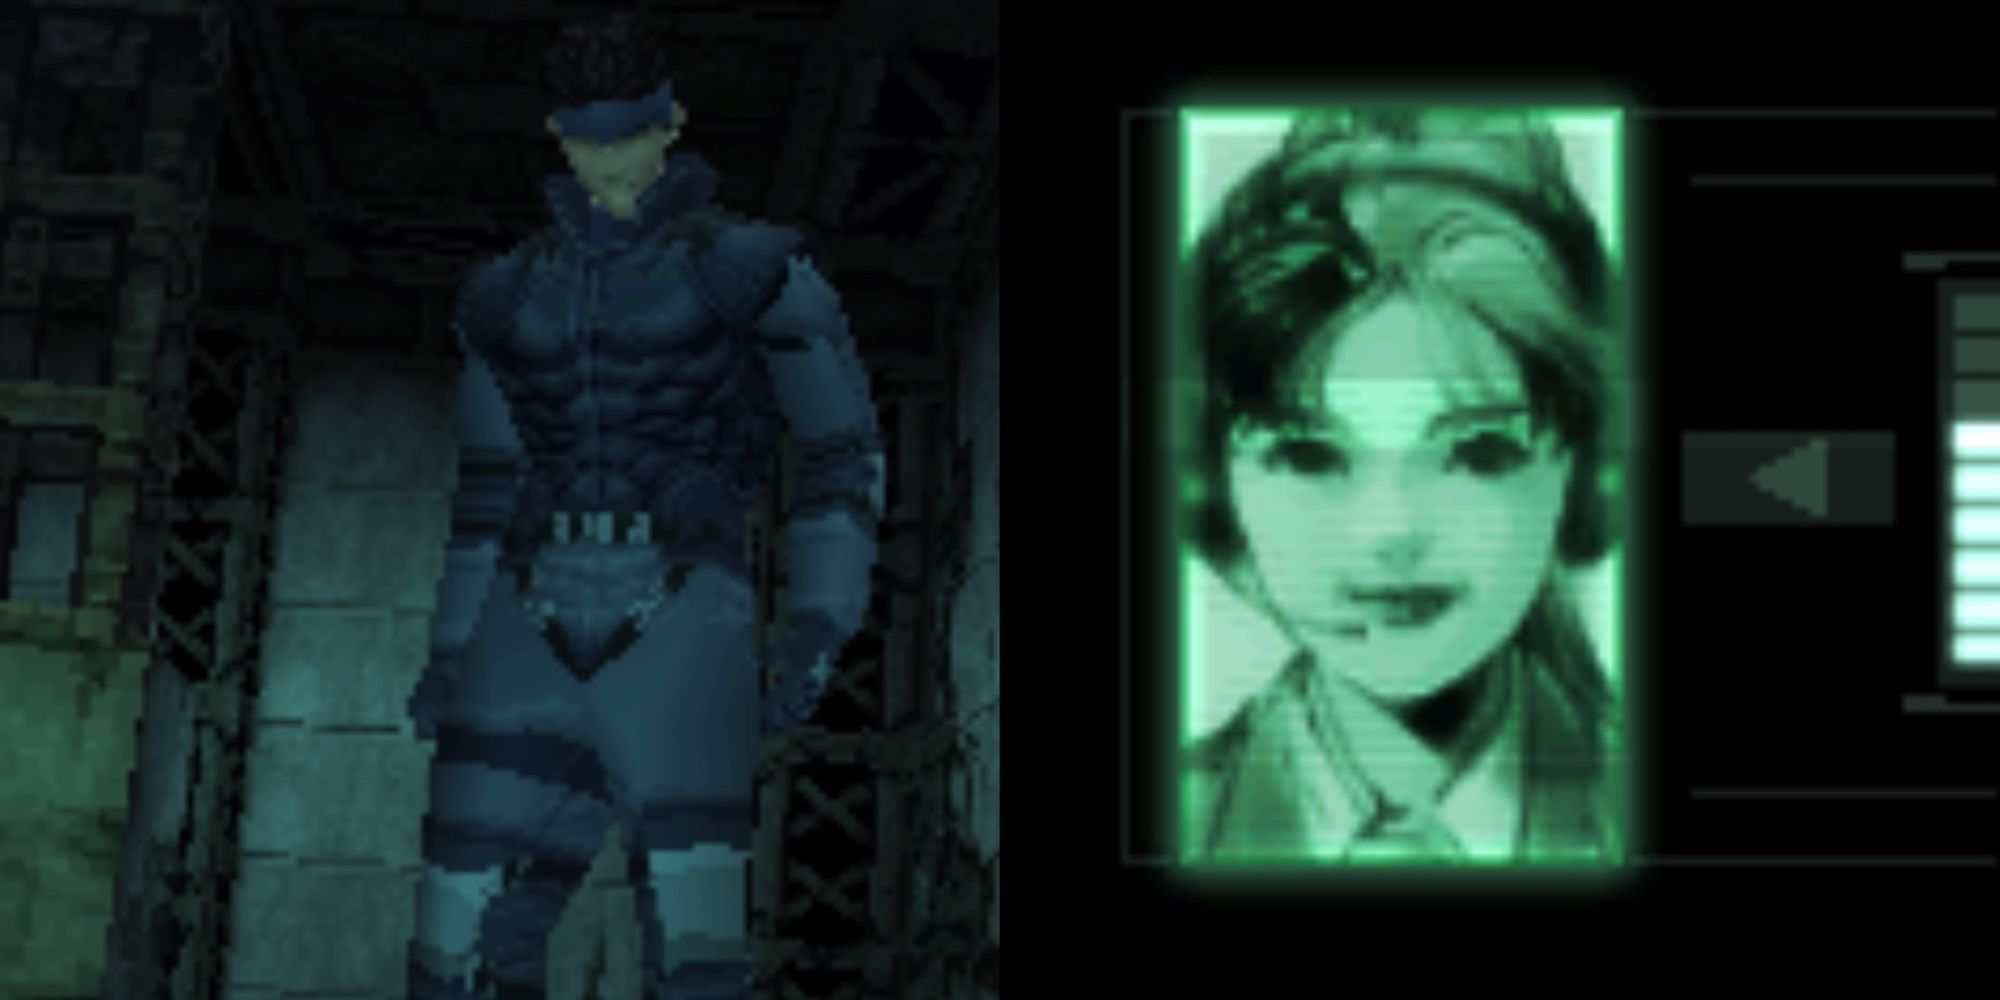 Metal Gear Solid split image Snake and mei ling